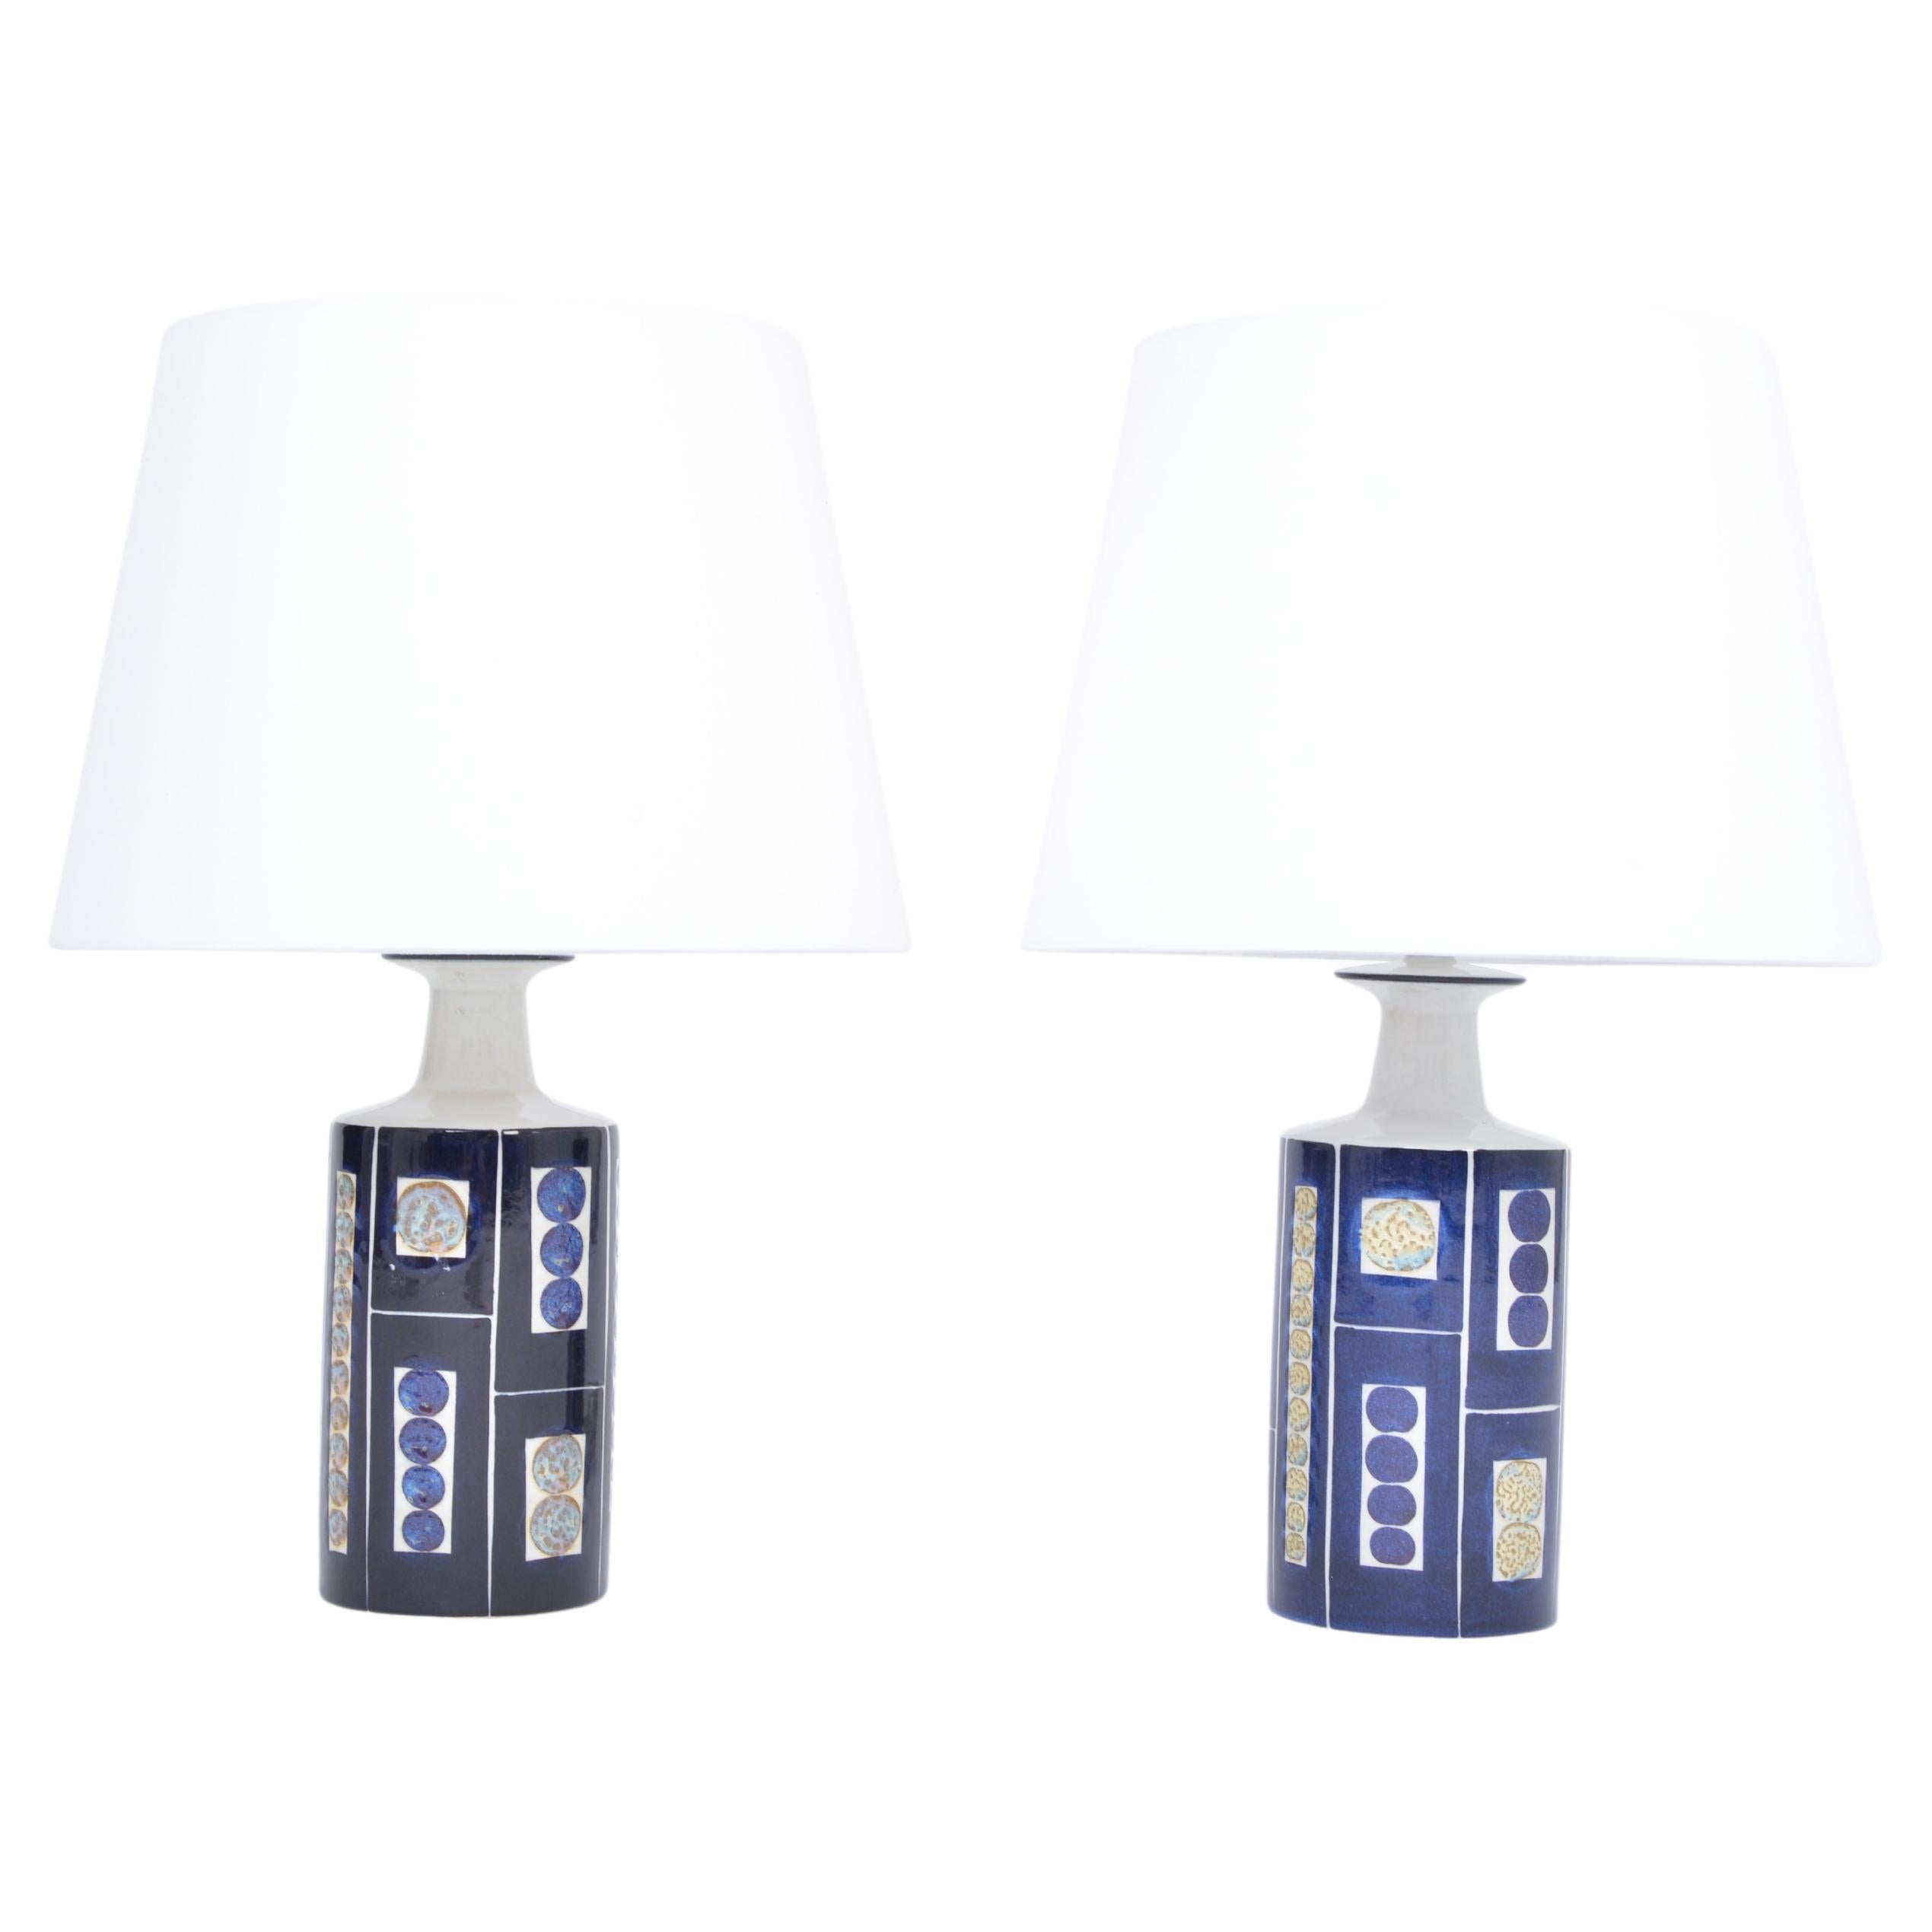 Pair of Royal 9 Tenera Table Lamps by Inge-Lise Koefoed for Fog & Mørup, 1967 For Sale